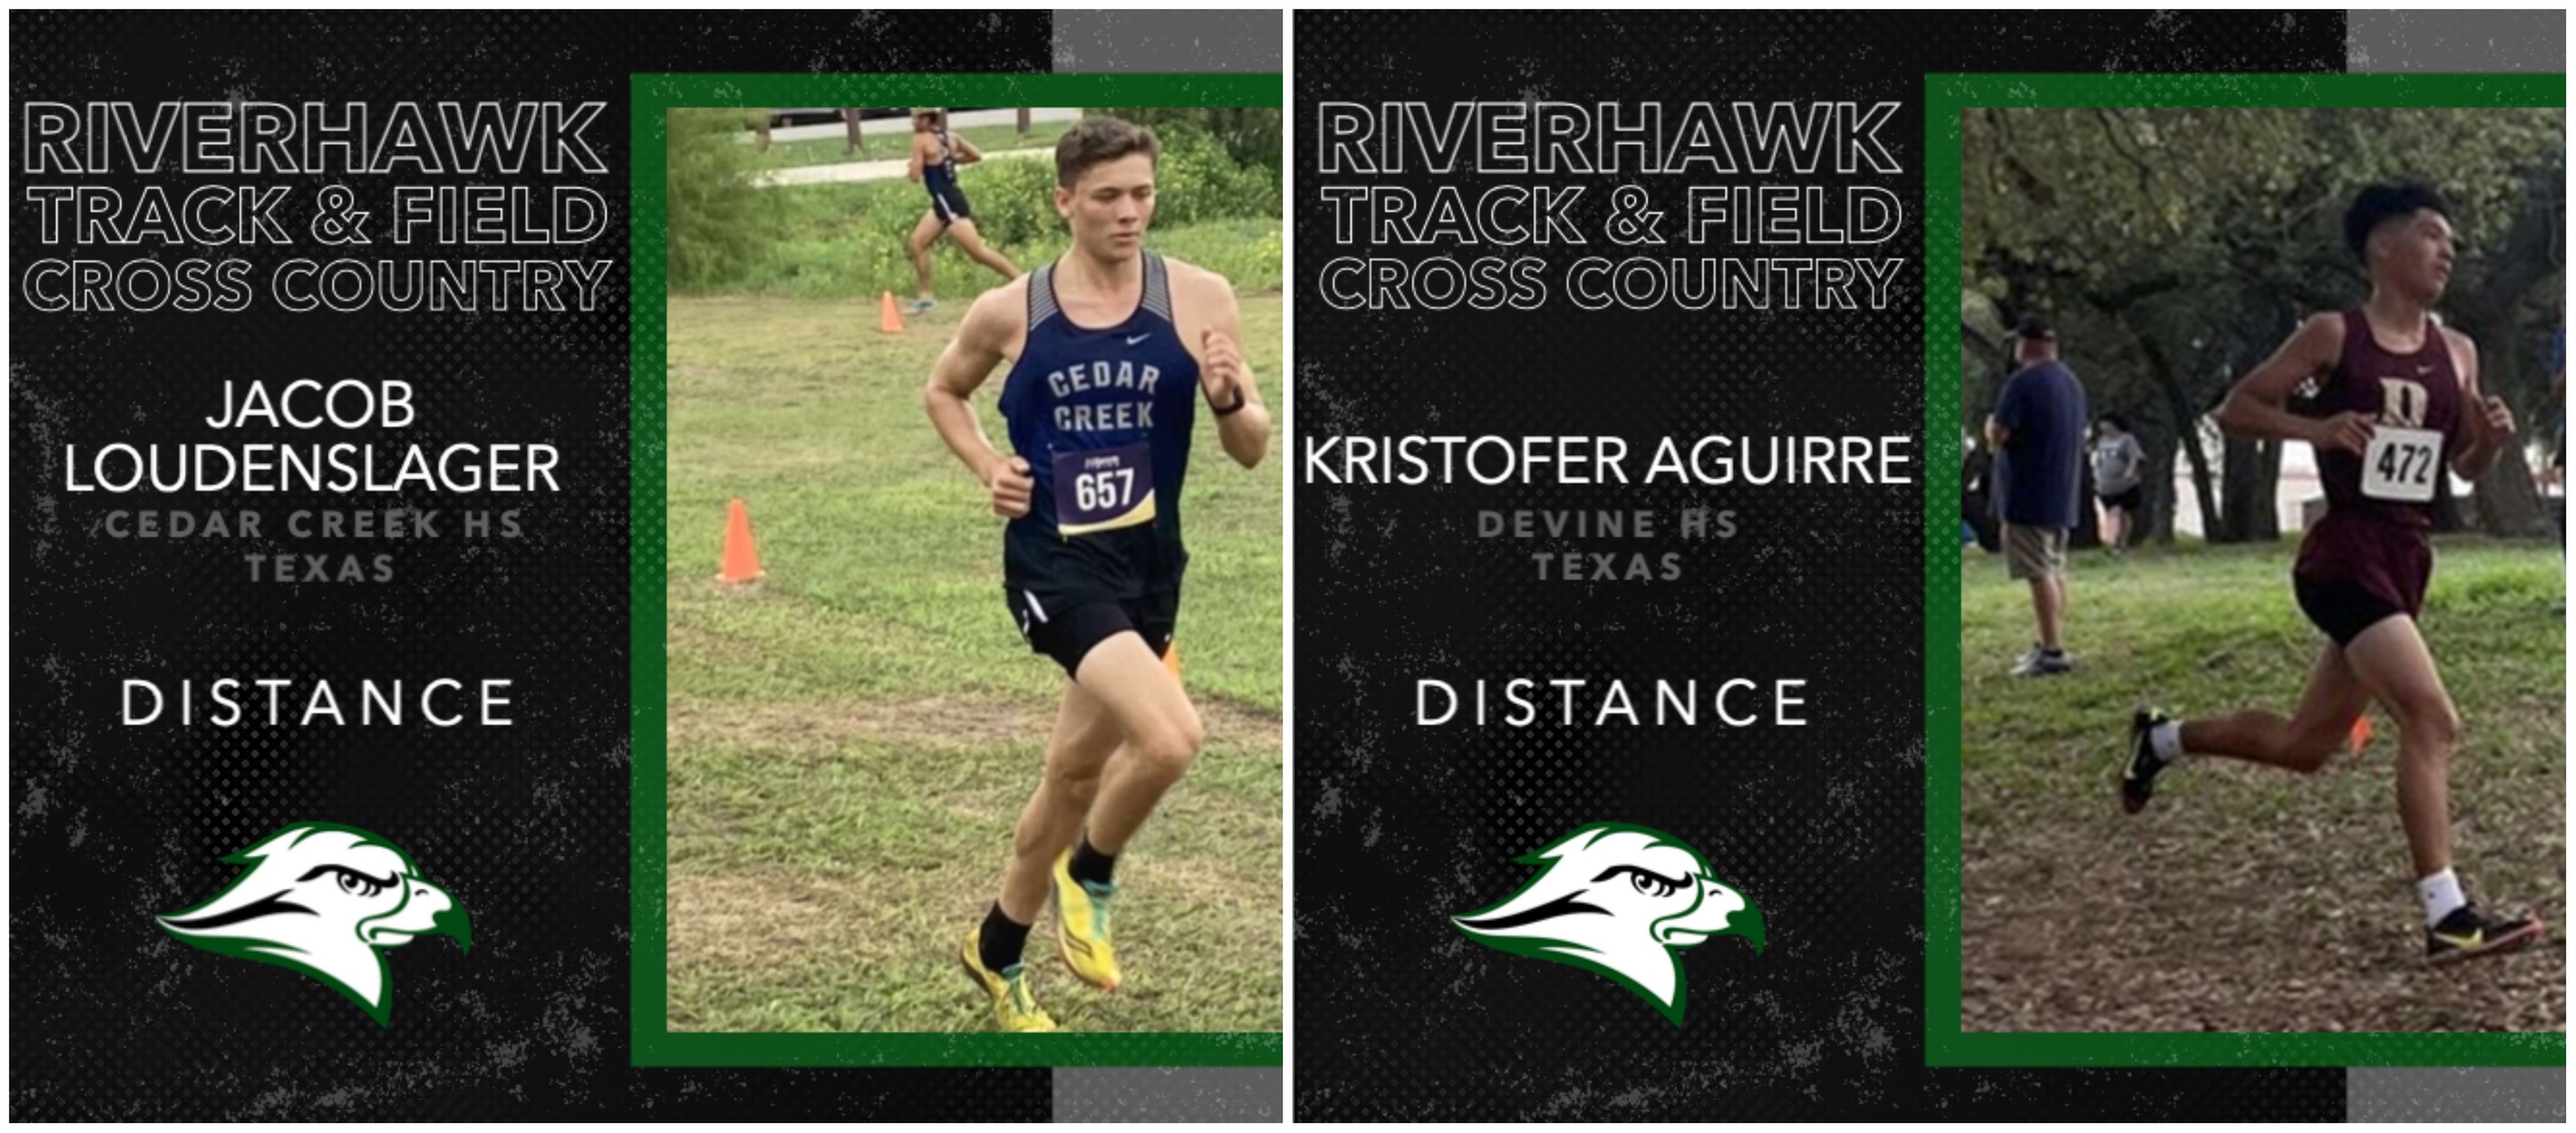 RiverHawk Cross Country and Track & Field Sign 2 From Texas